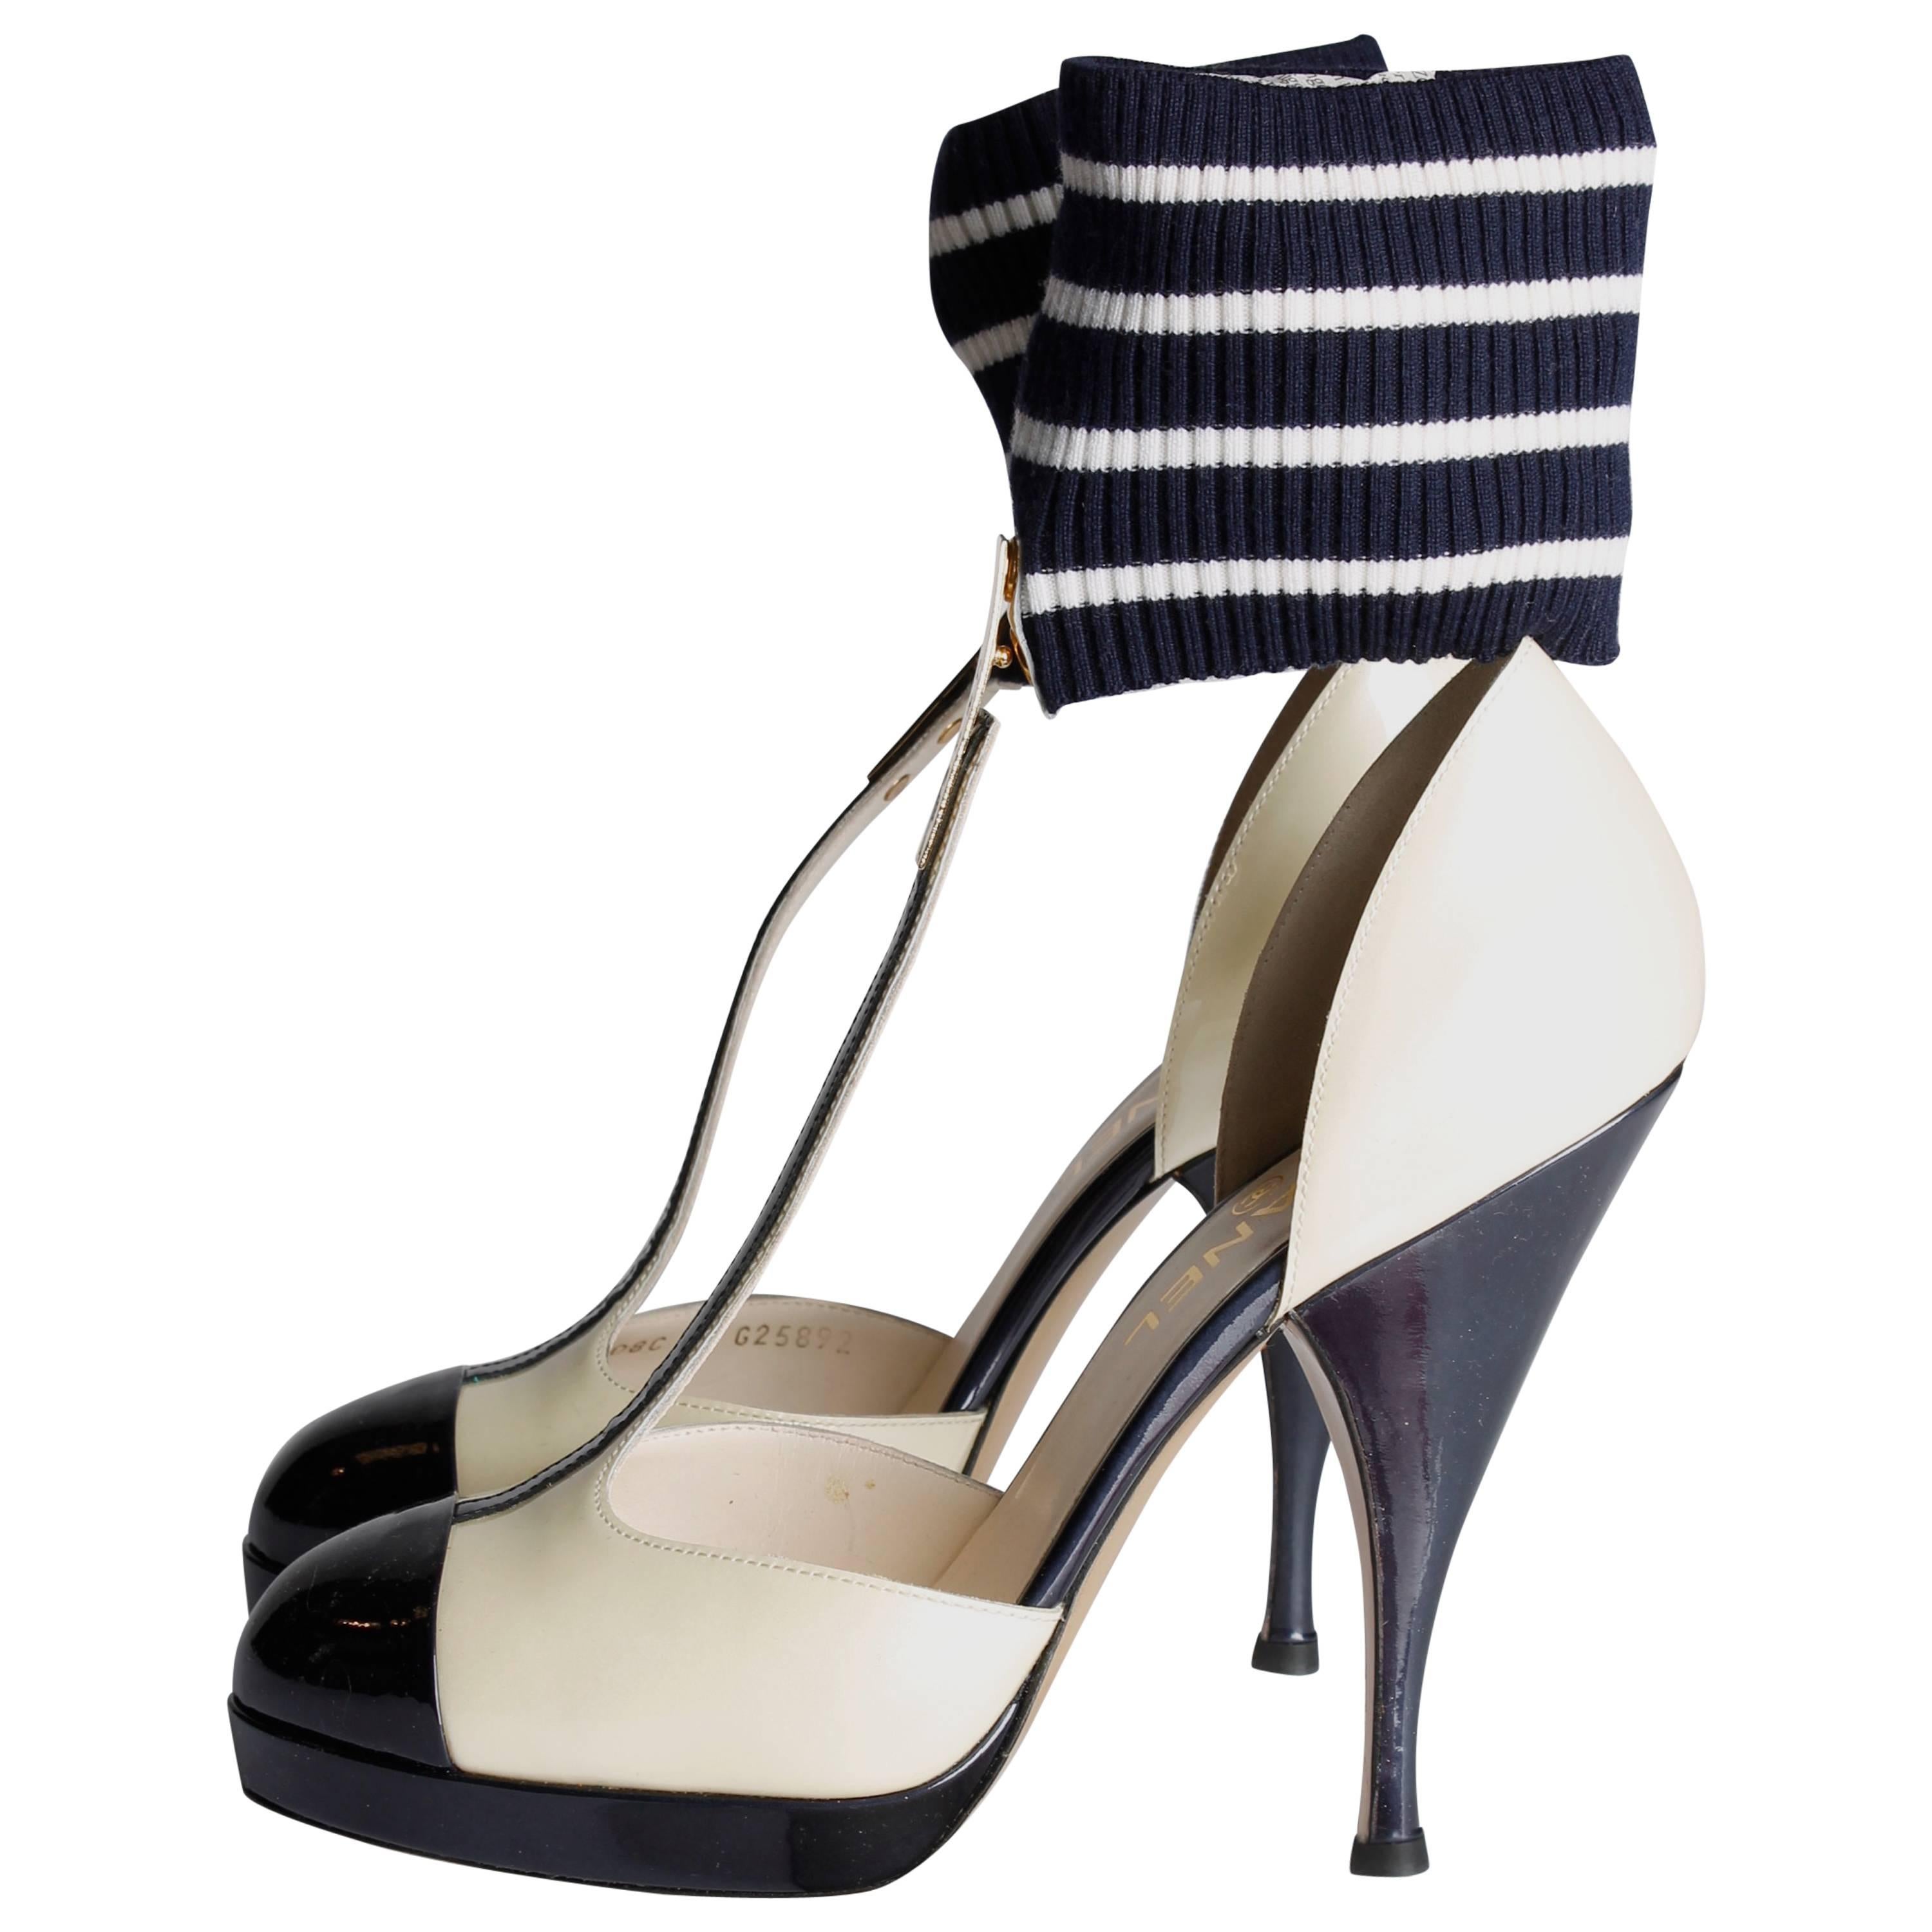 Chanel T Strap Ankle Cuff Pumps - dark navy blue/champagne patent leather